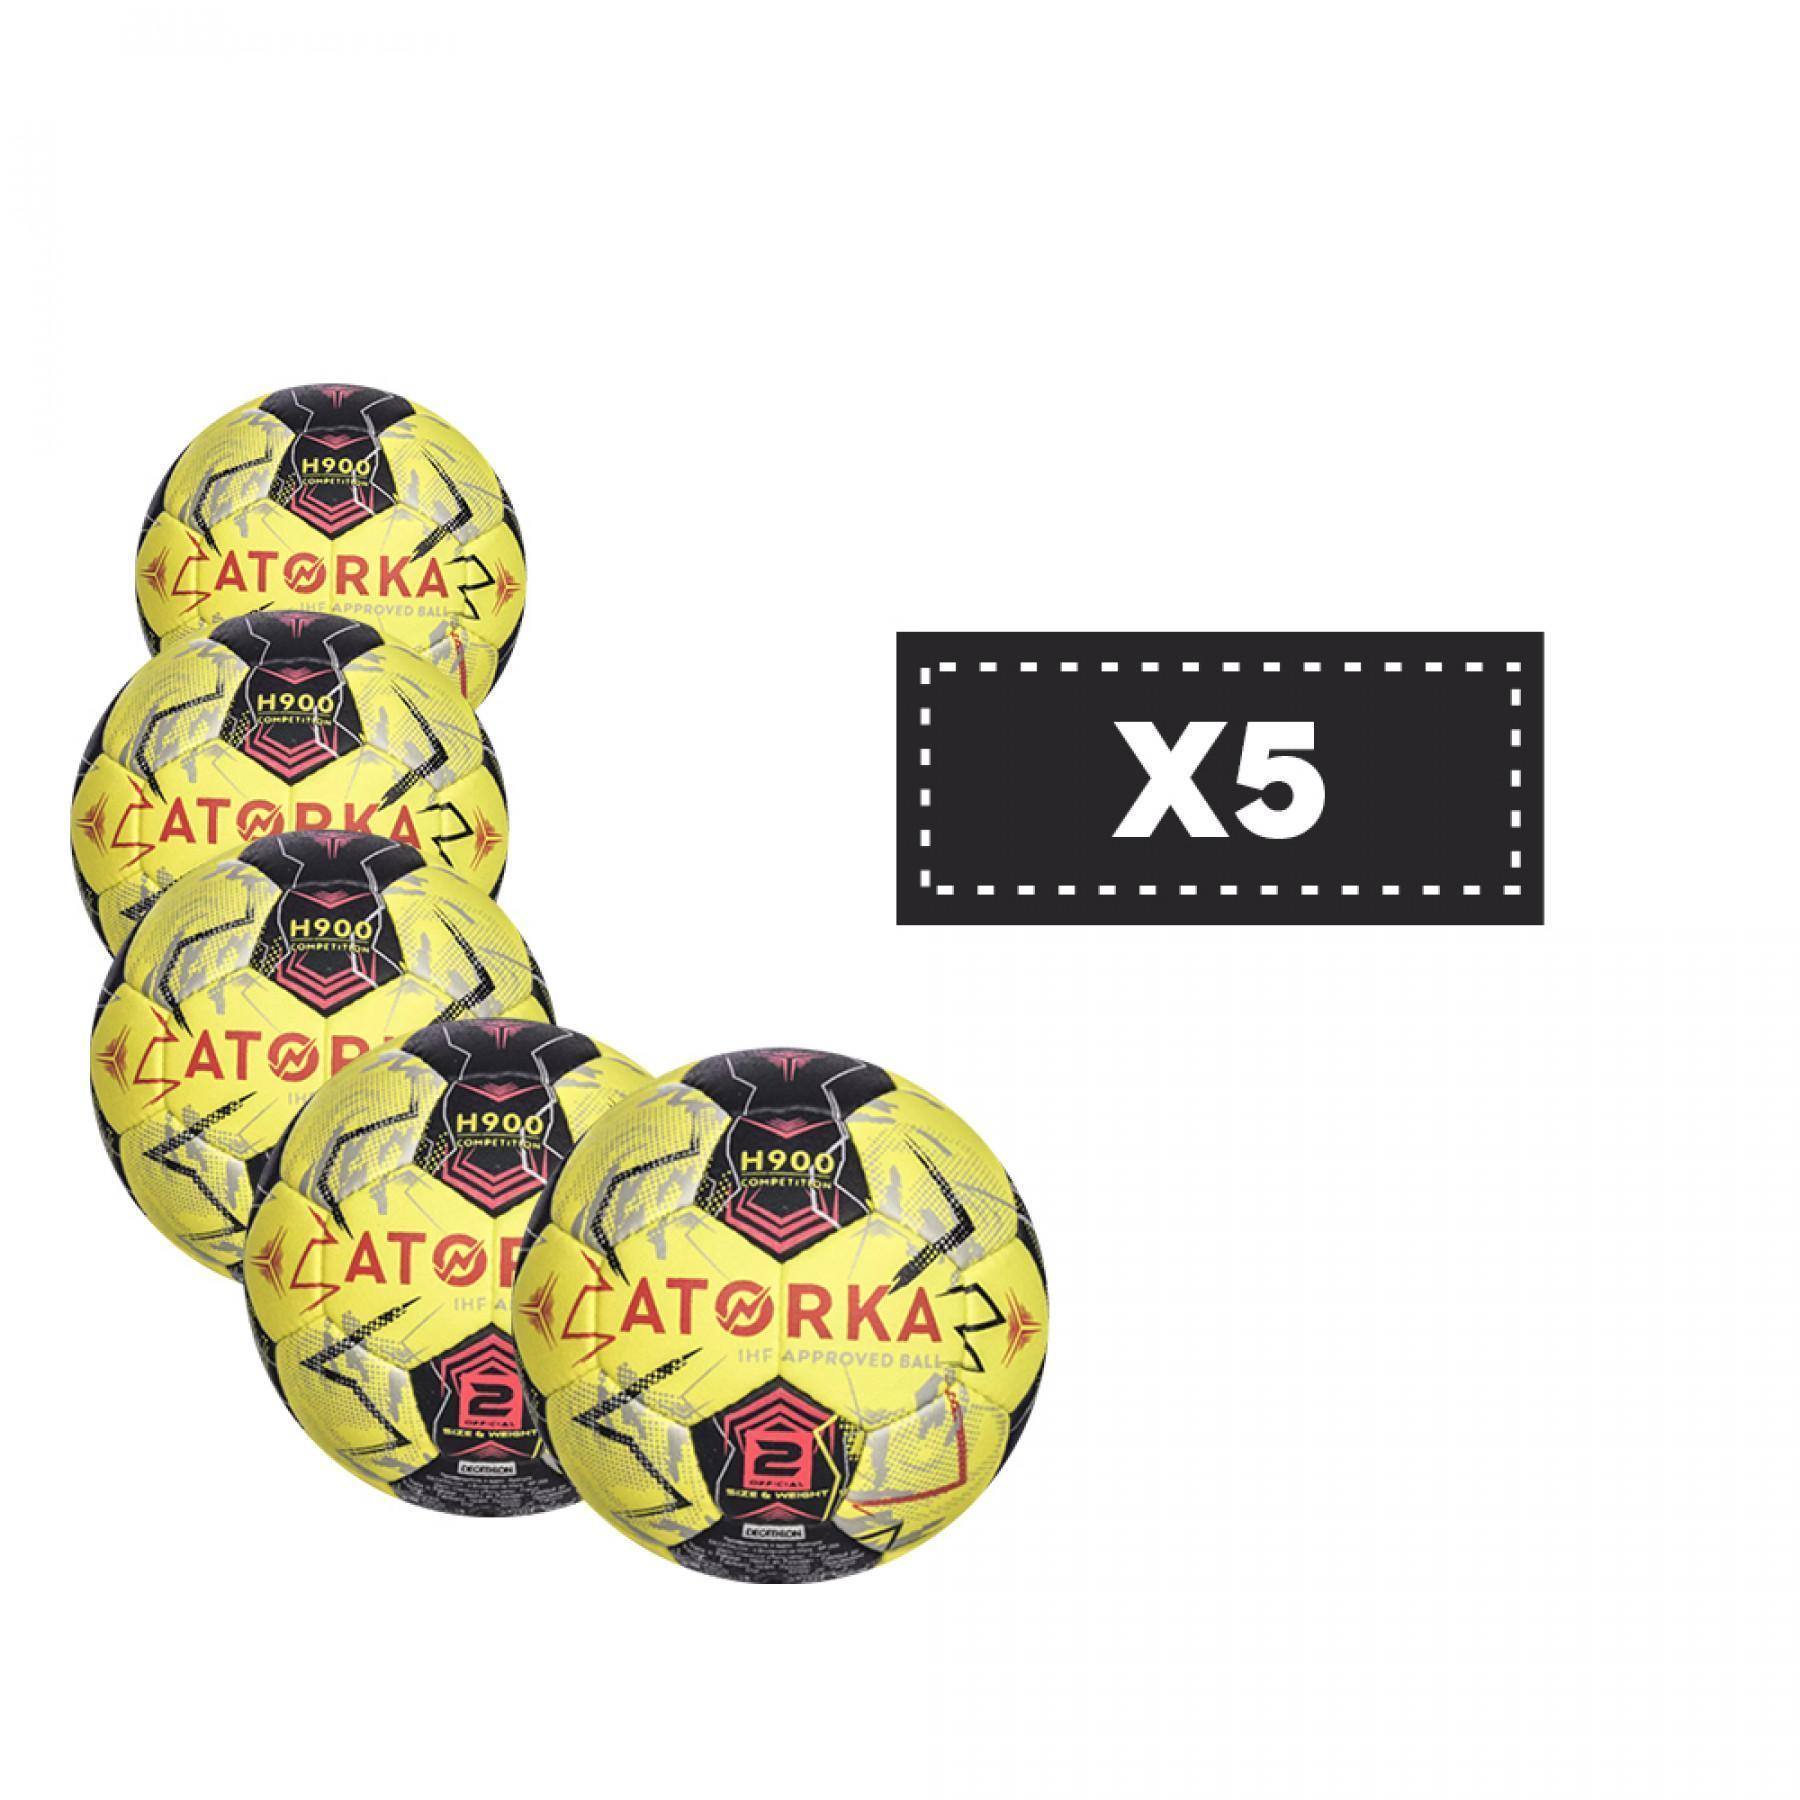 Lot de 5 ballons Atorka H900 IHF - Taille 2